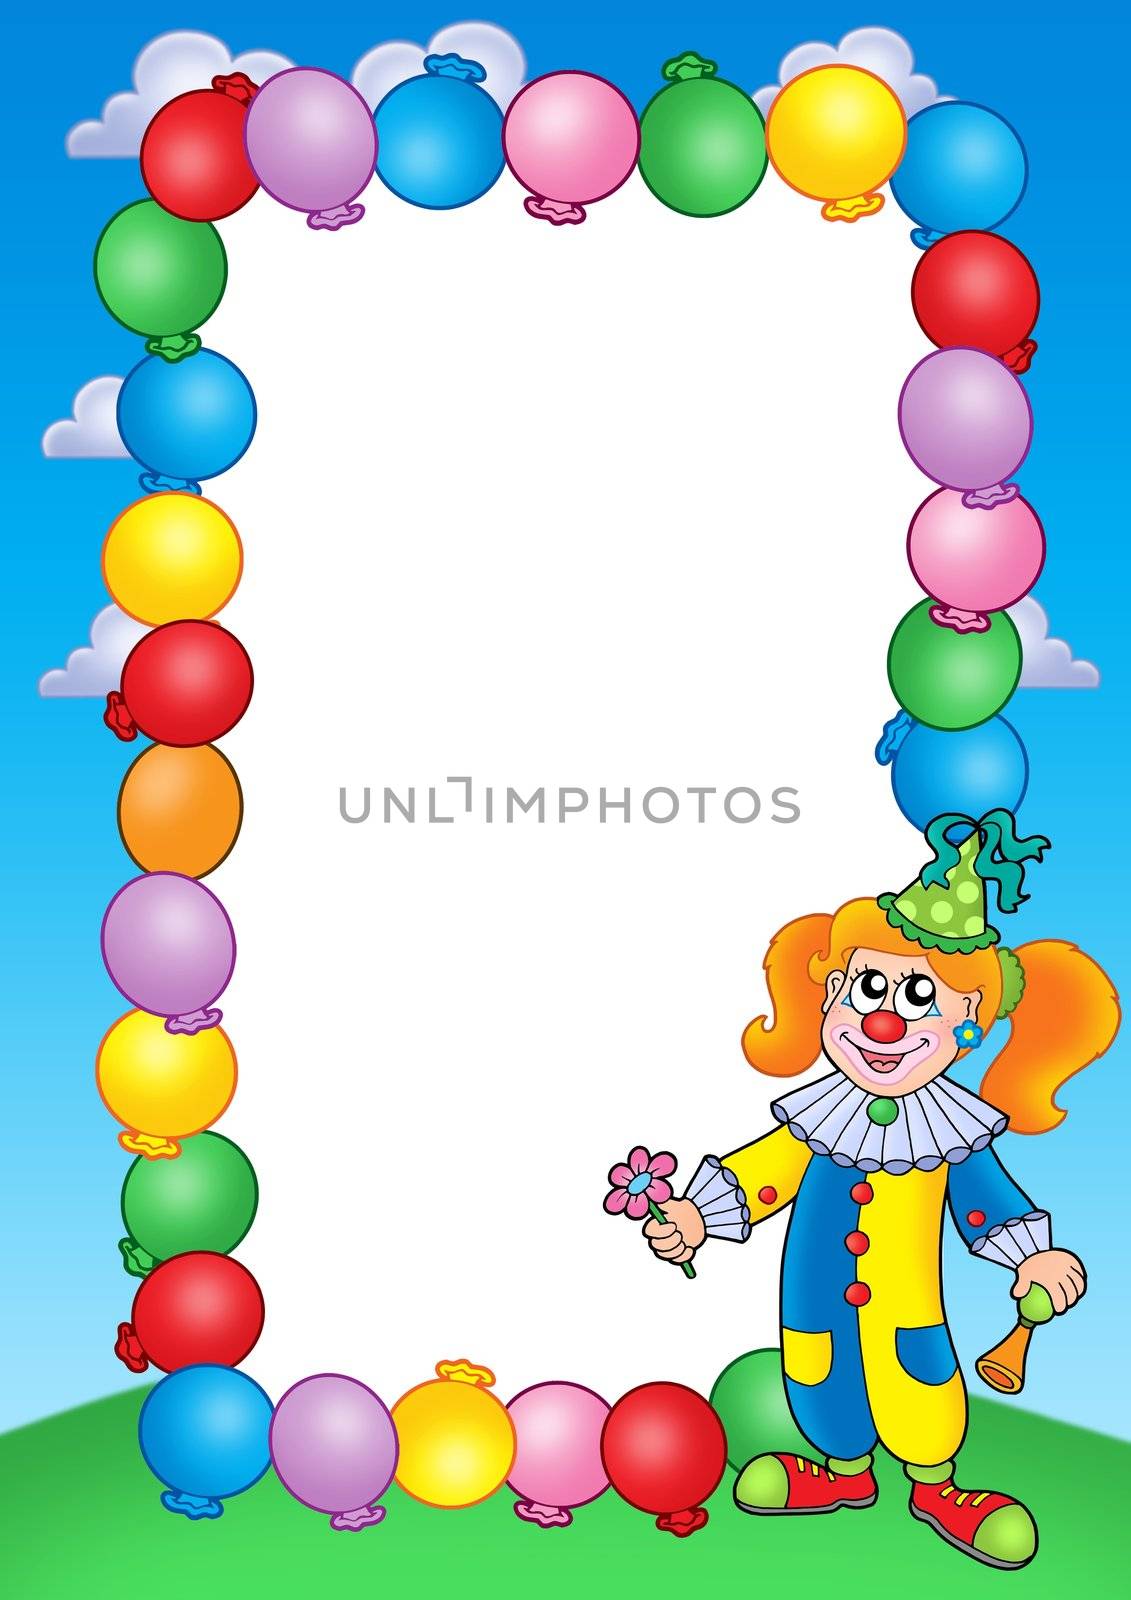 Party invitation frame with clown 1 by clairev